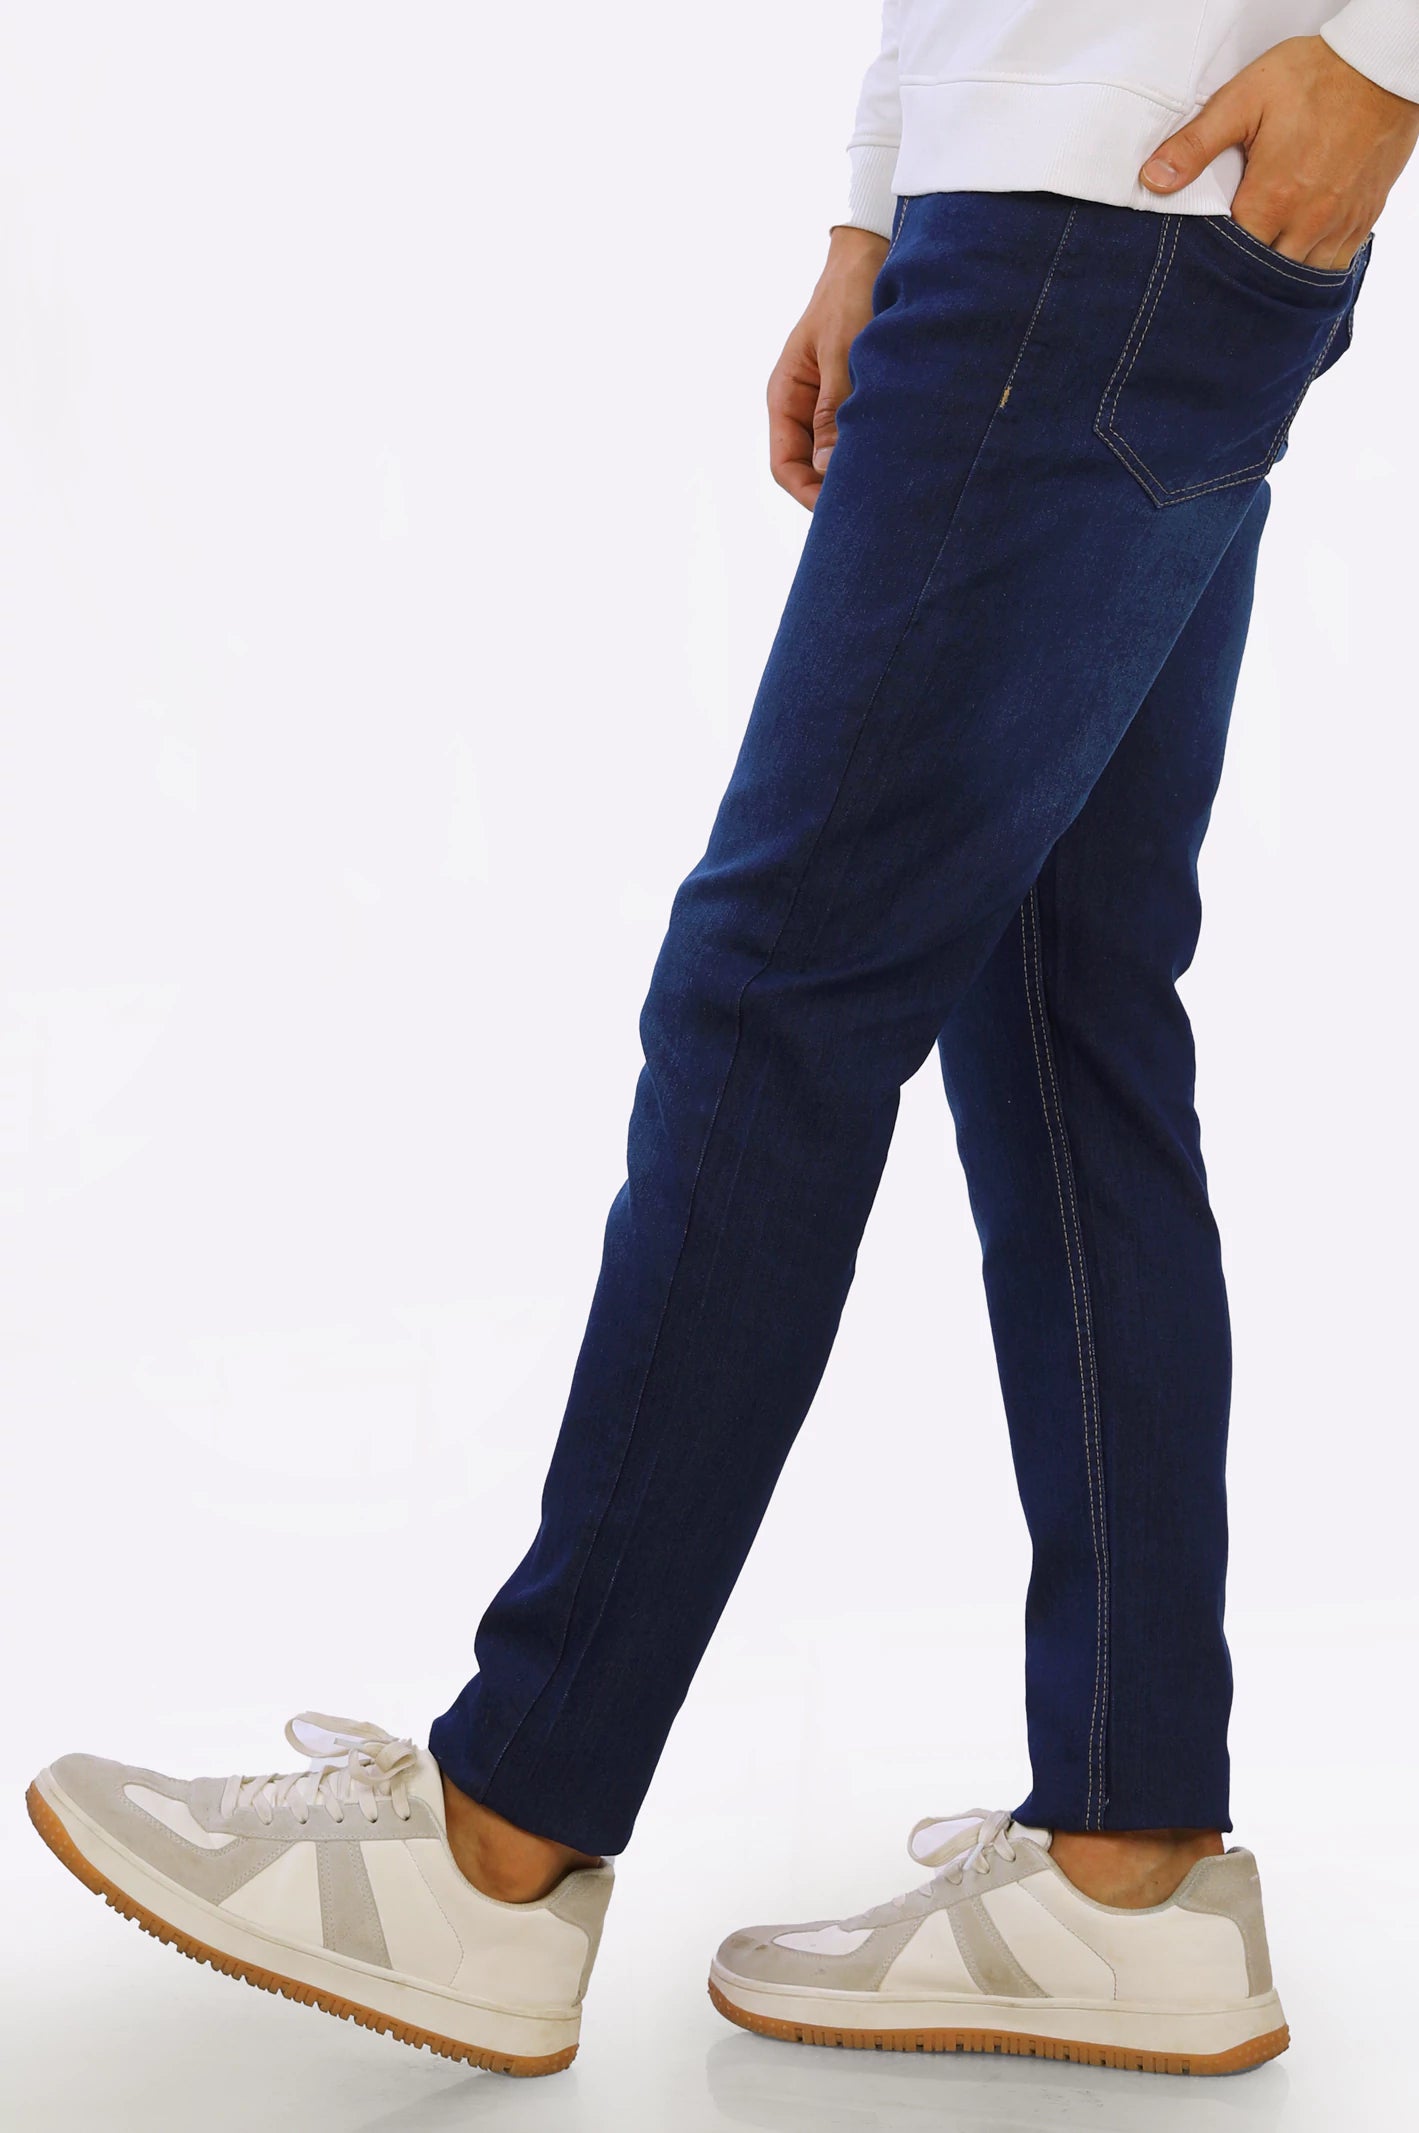 Dark Blue Slim Fit Jeans From Diners